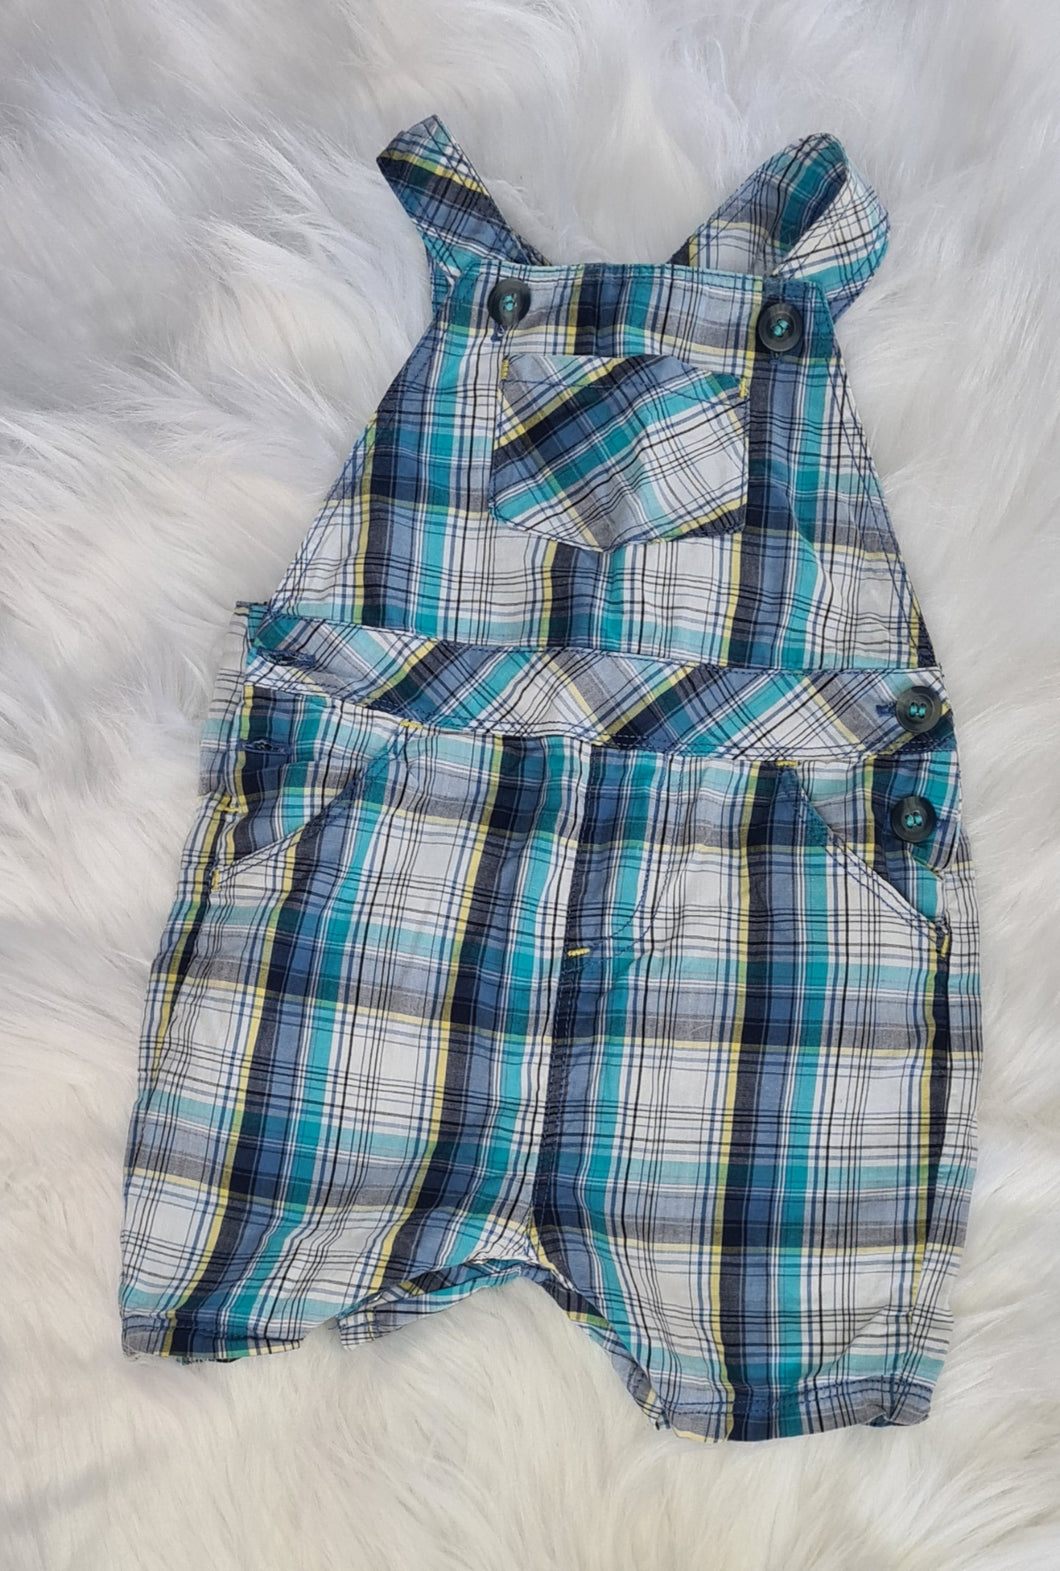 Boys 3-6 Months - Blue Chequered Dungaree Shorts